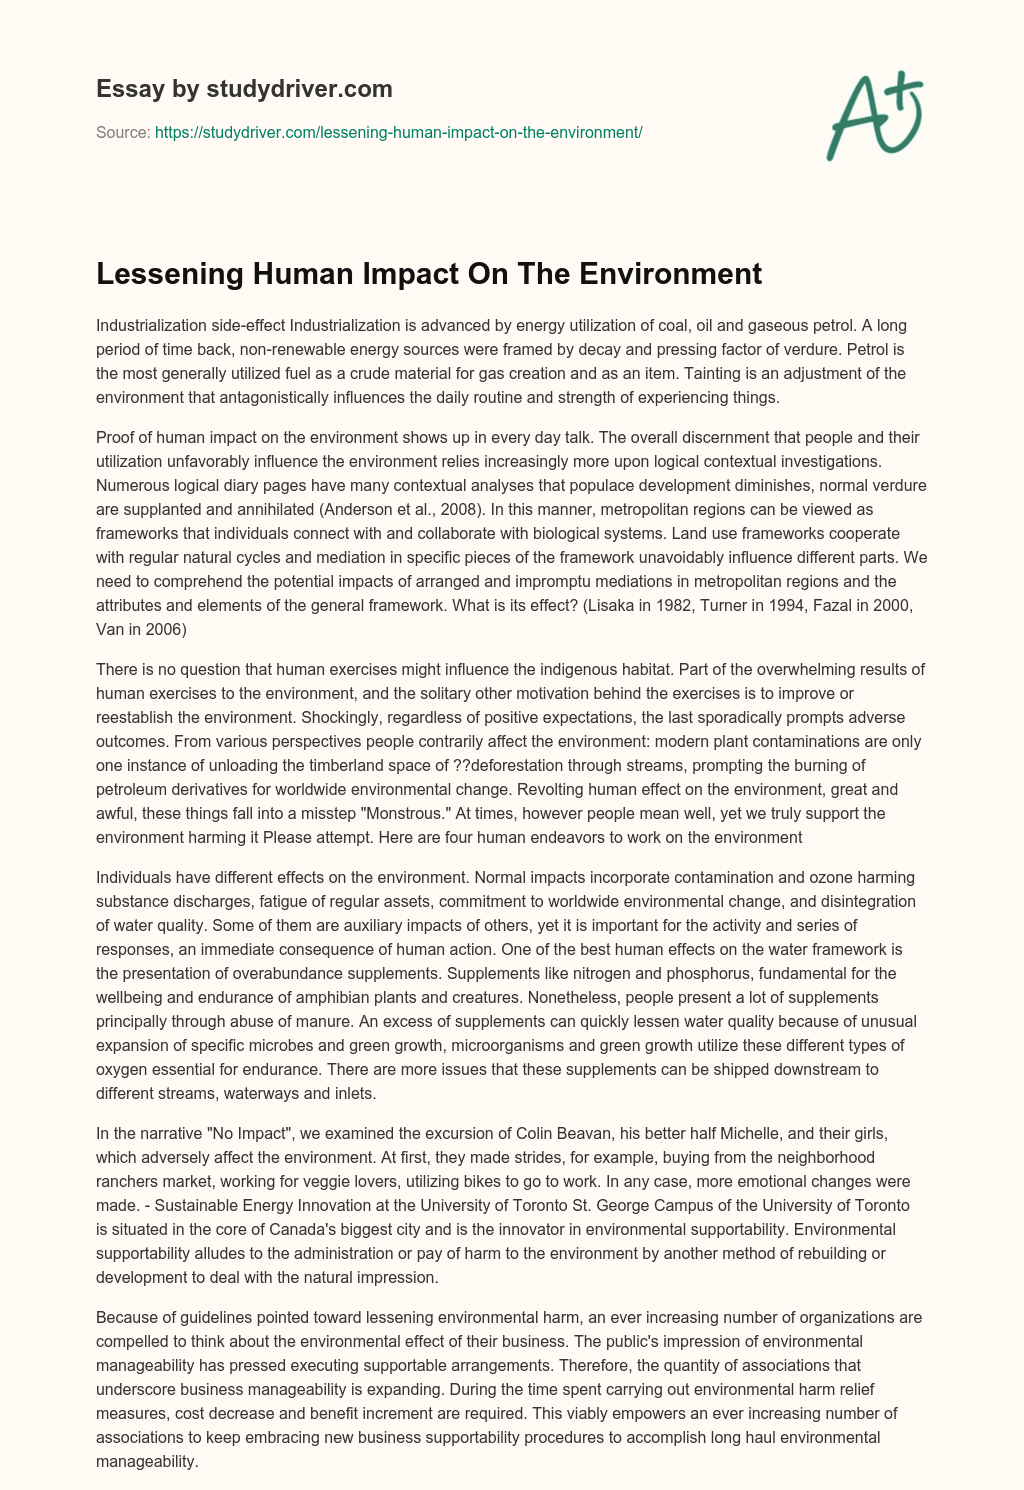 Lessening Human Impact on the Environment essay